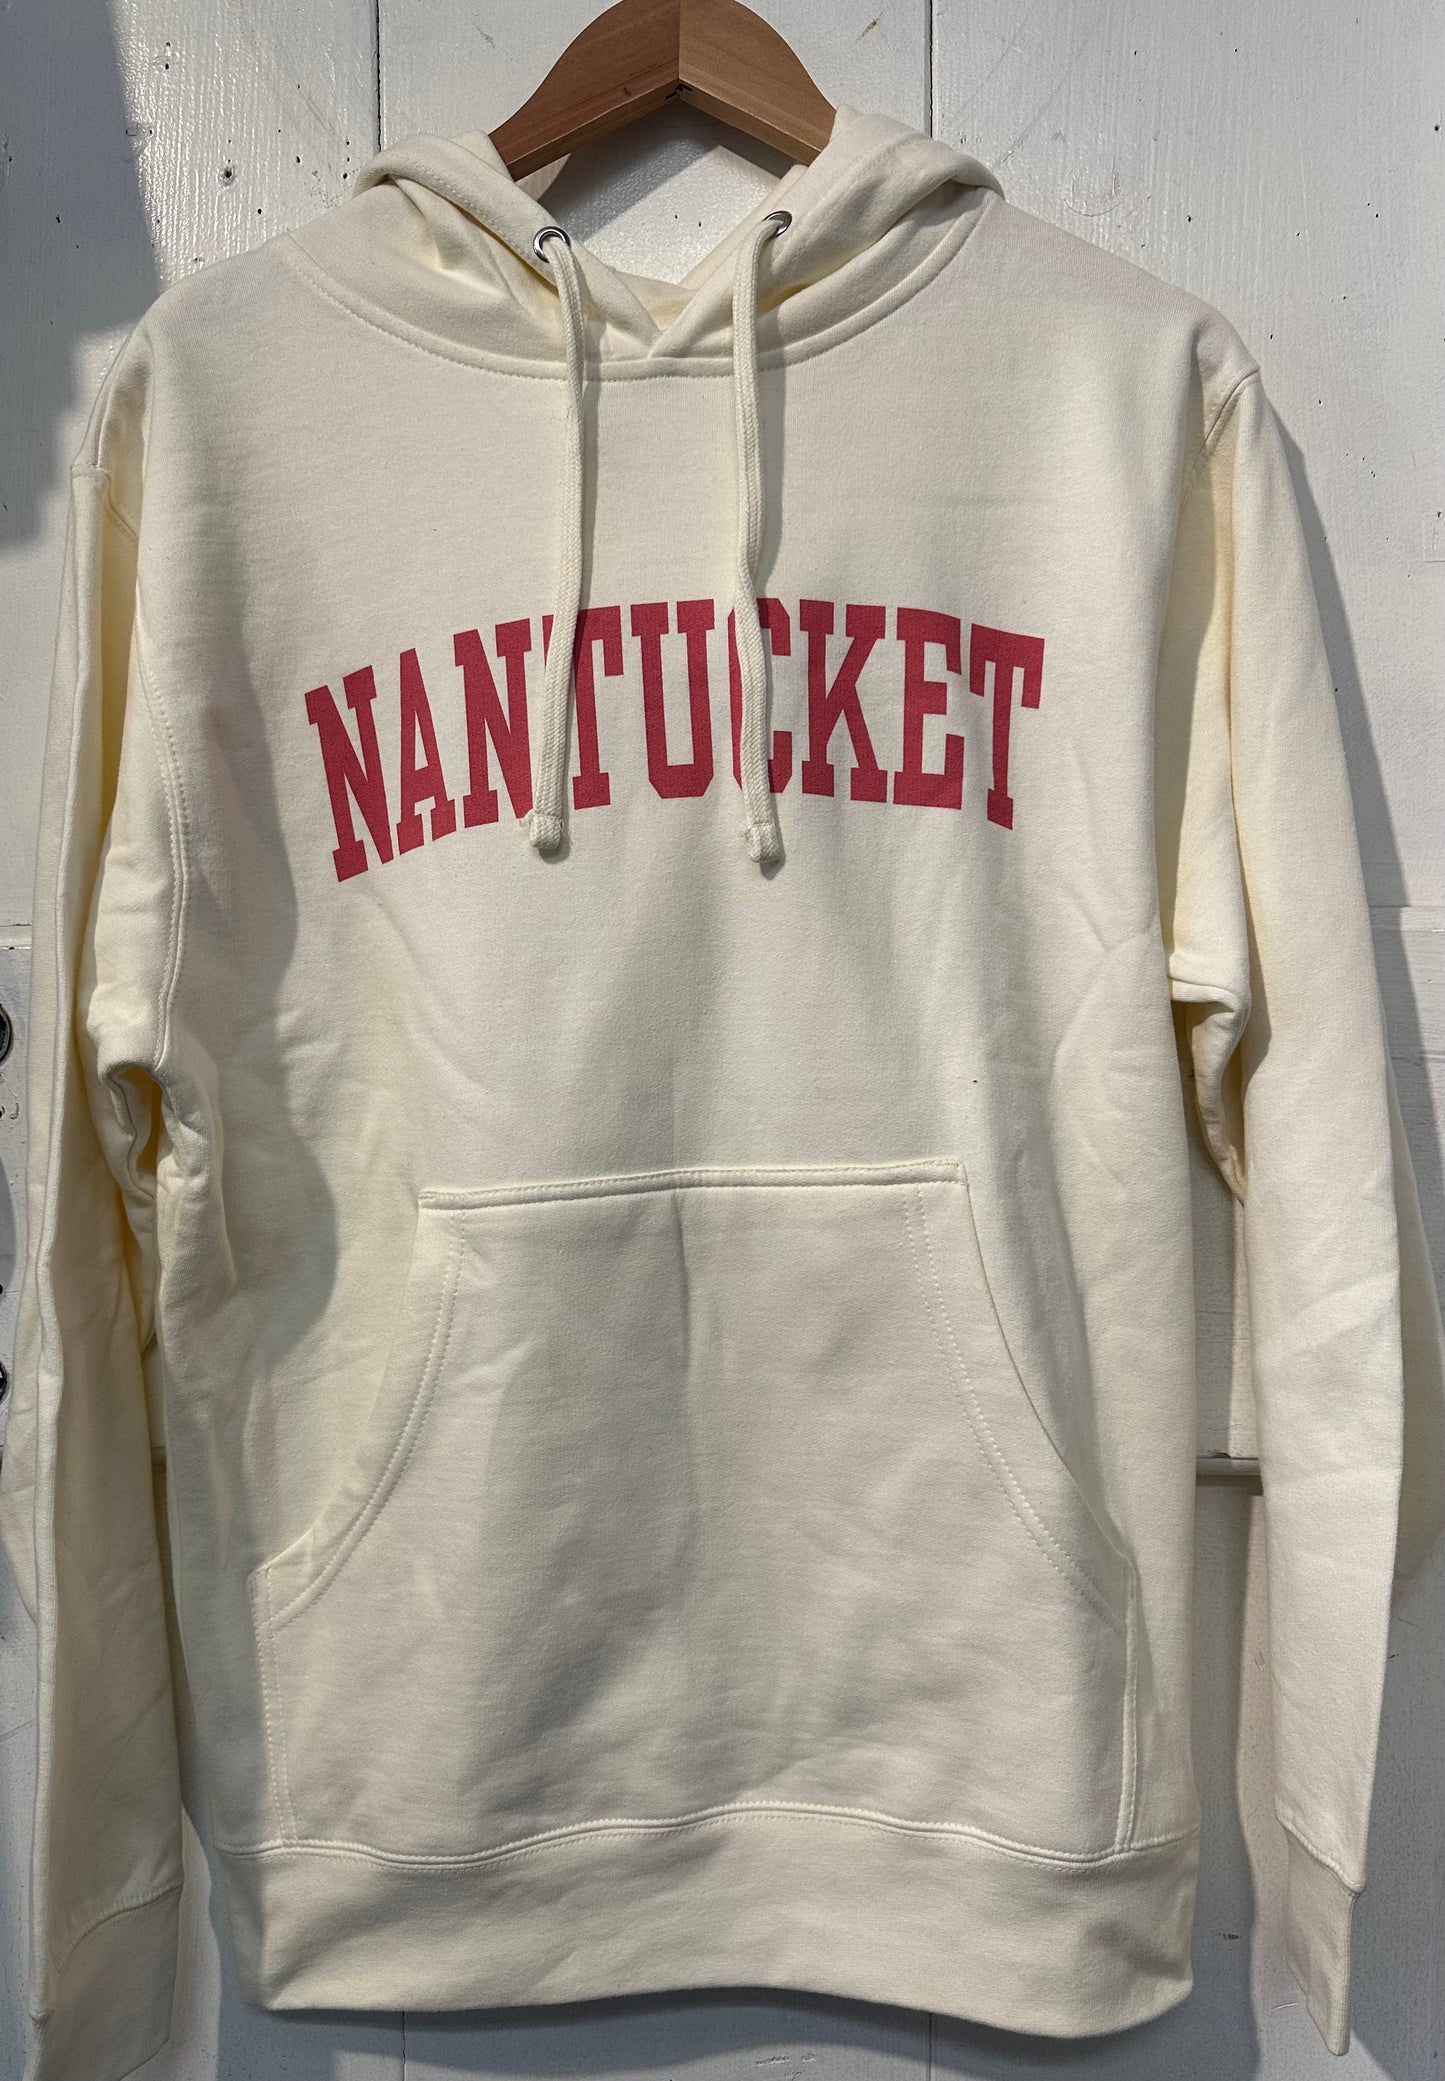 NANTUCKET HOOD WITH RED ARCH